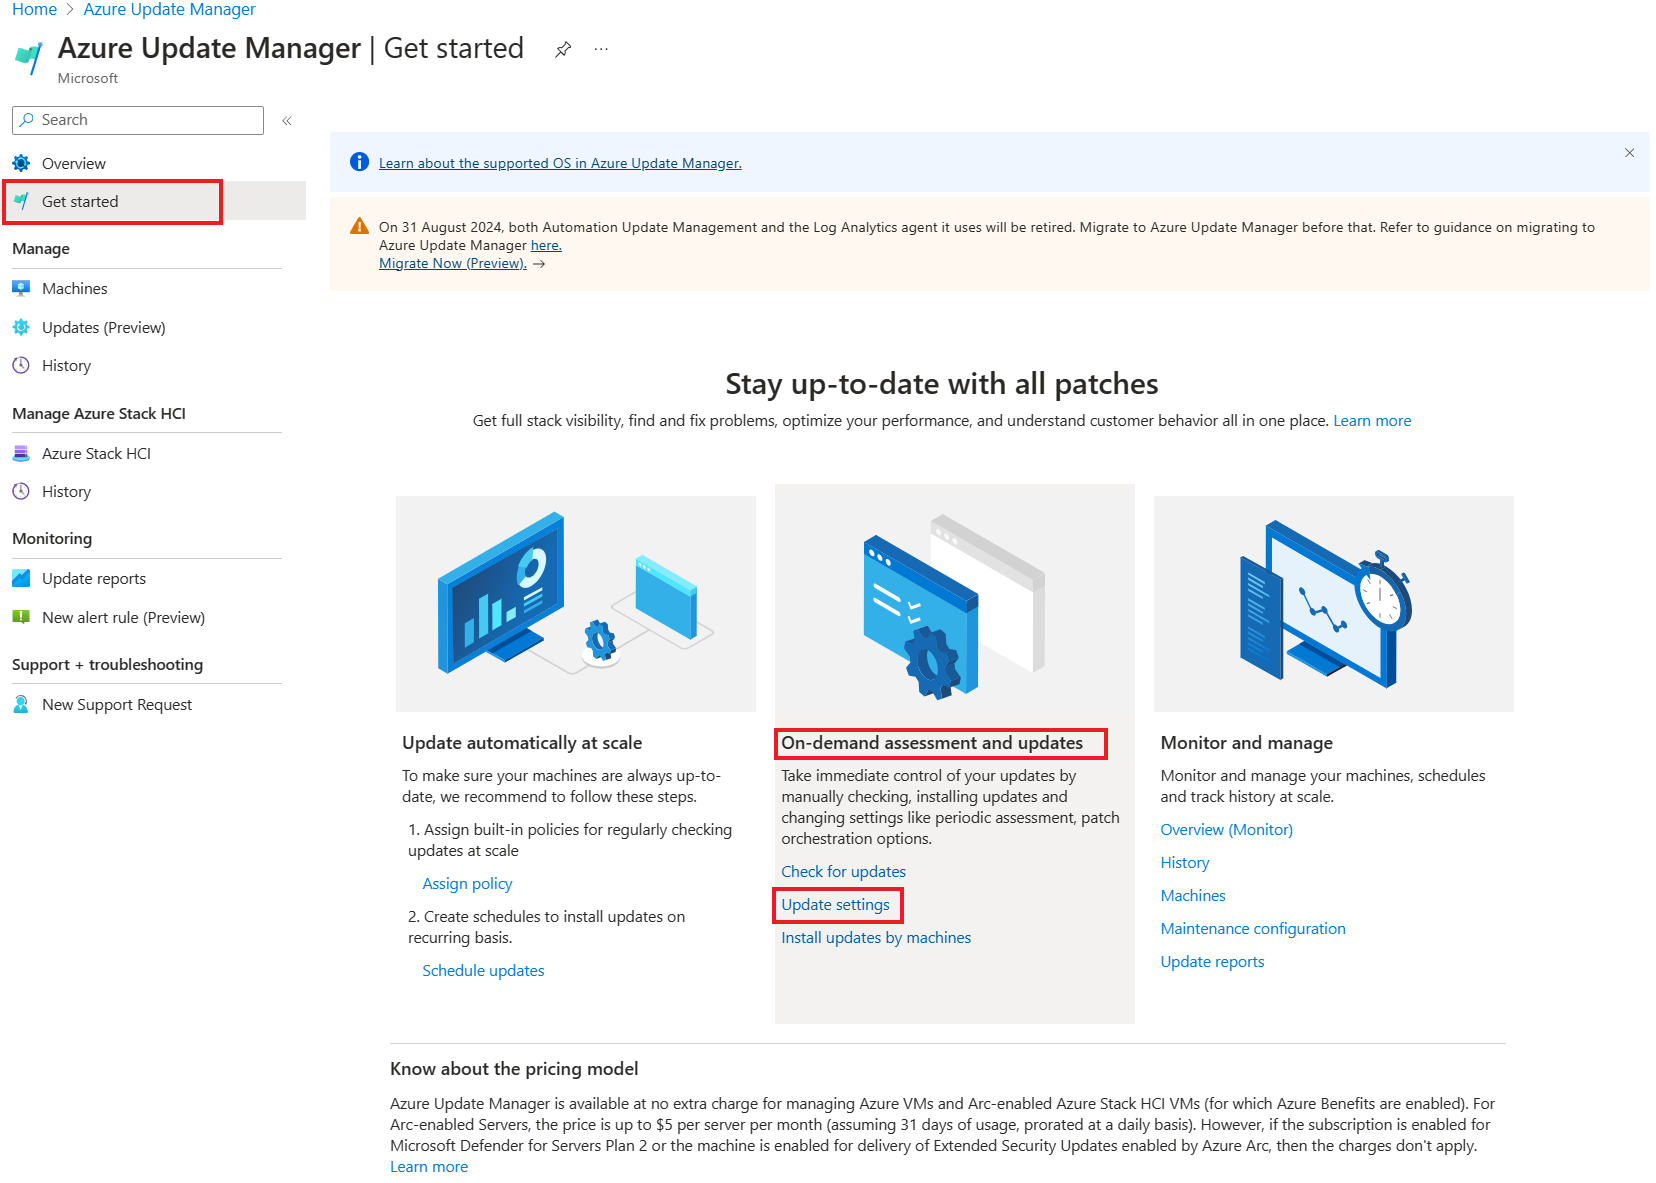 Screenshot that shows how to access the Update settings option to configure updates for virtual machines.